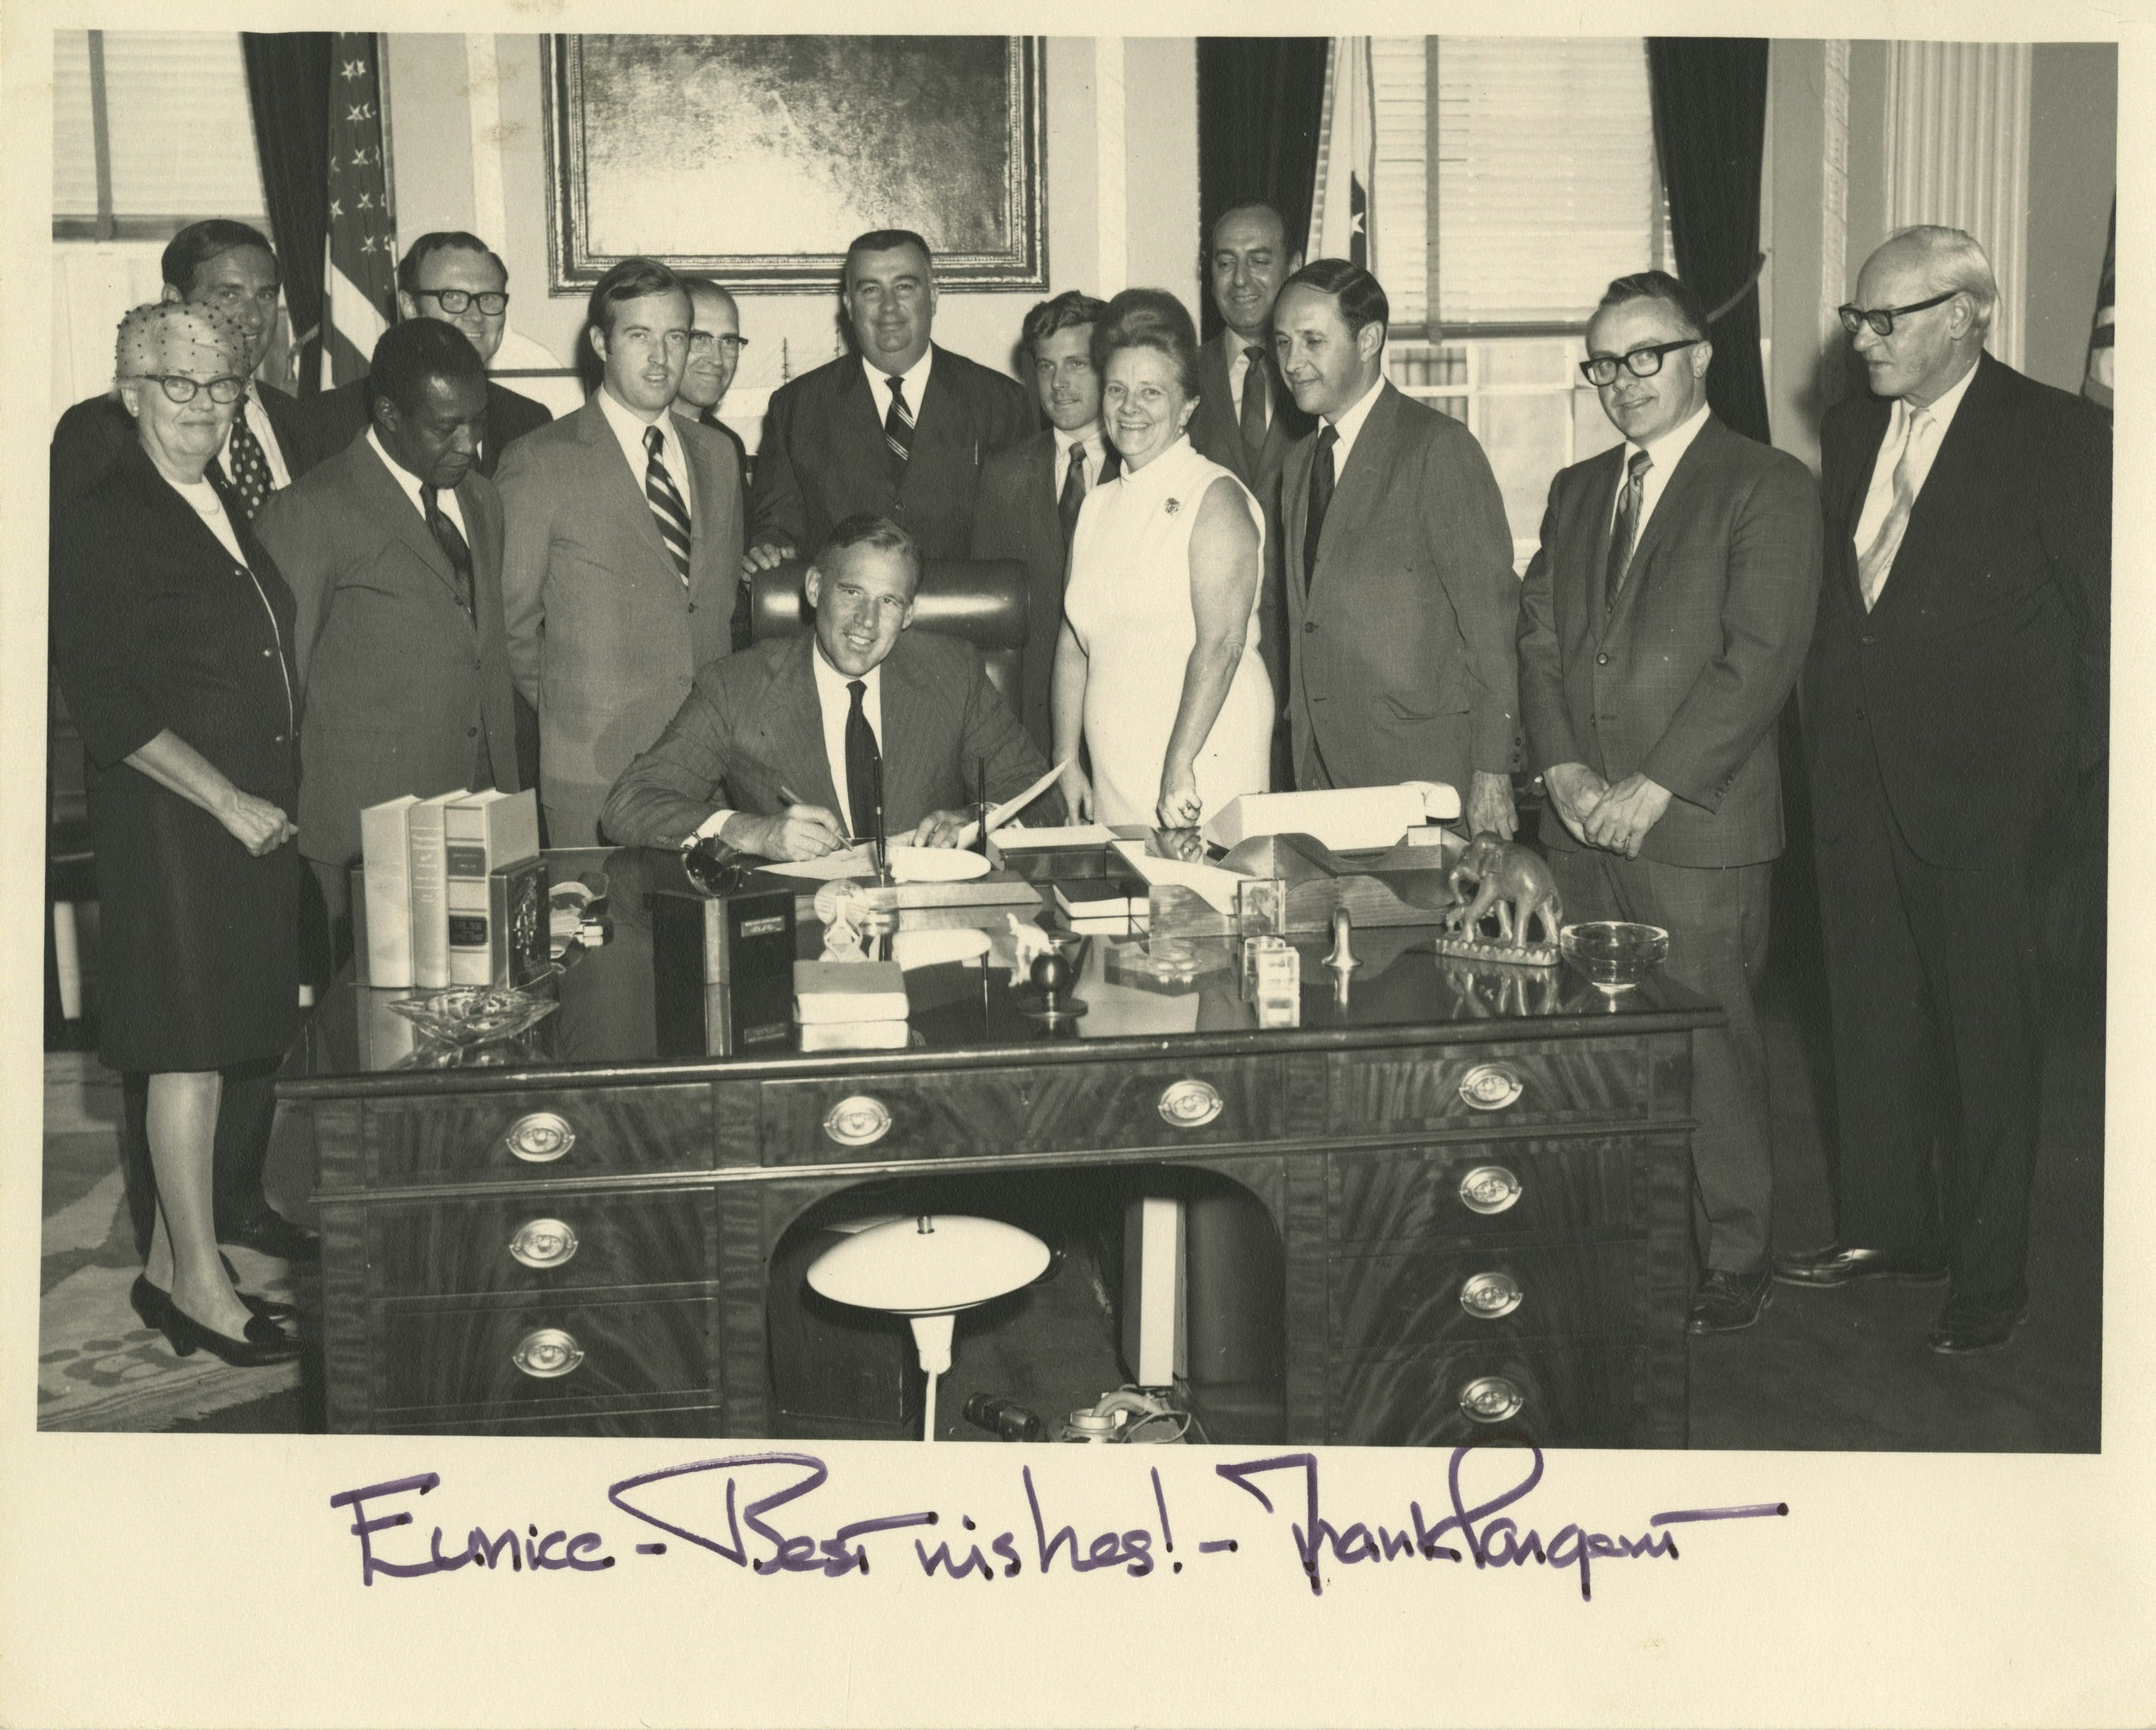 Eunice Howe with Governor Frank Sargent and a group of others in the Governor's office